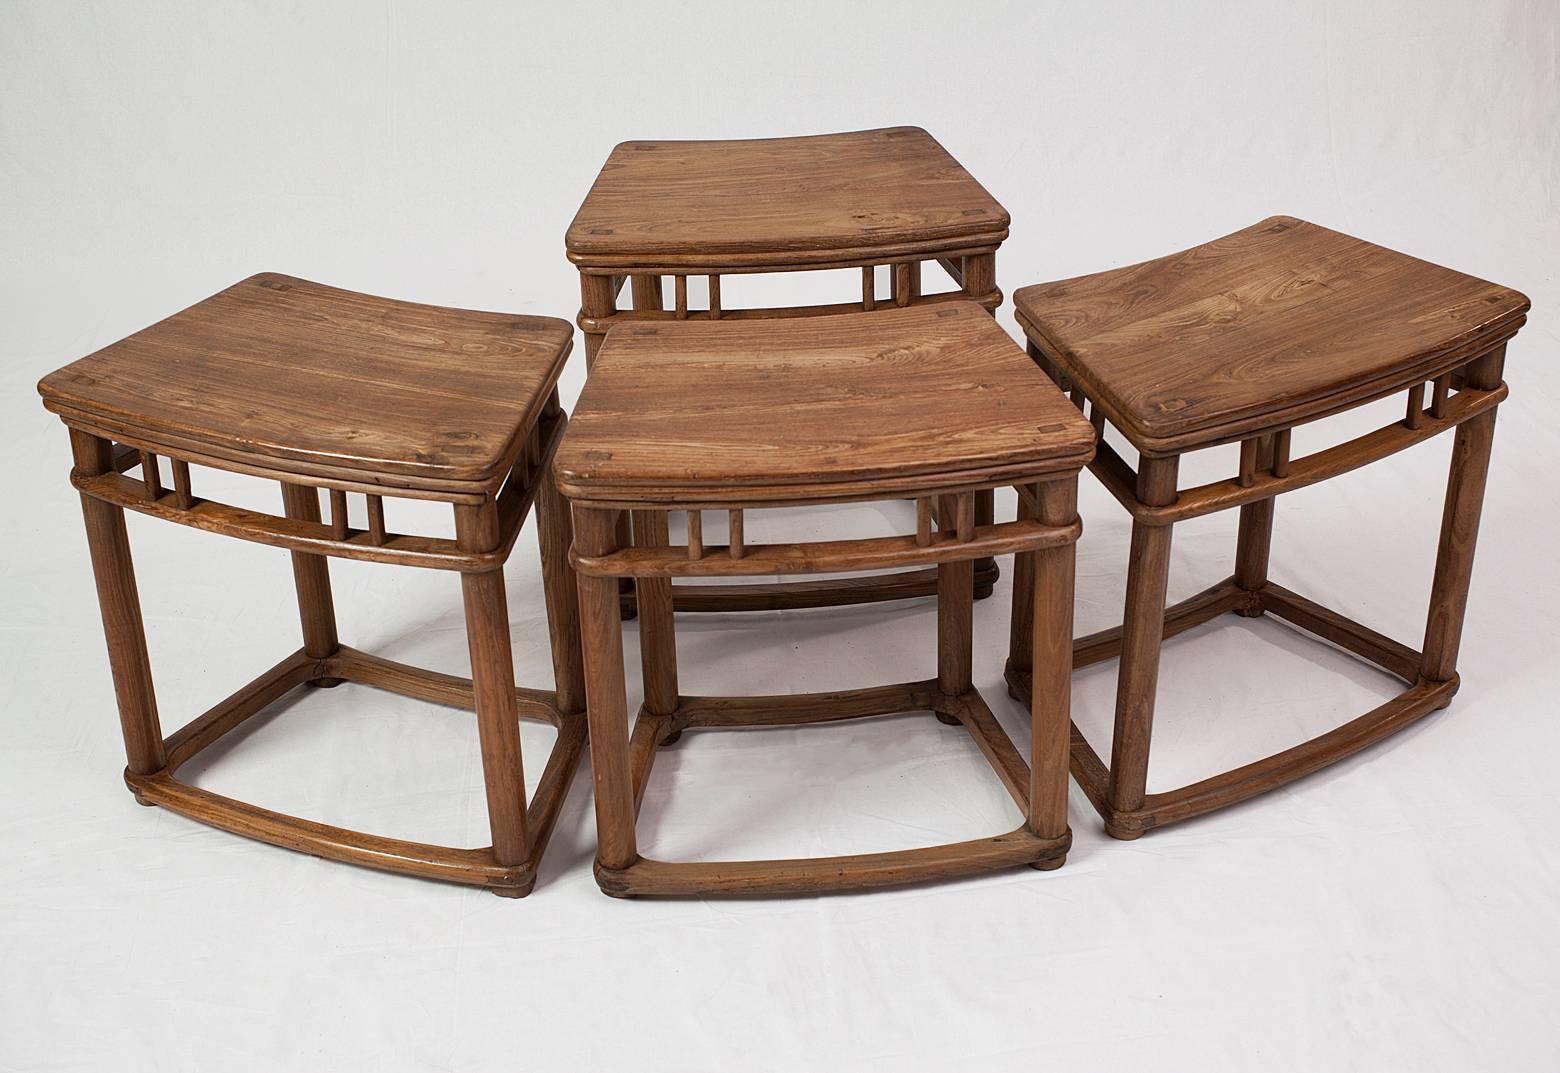 Rare Qianlong Qing Dynasty Convertible Table with Four Stools 18th Century For Sale 2